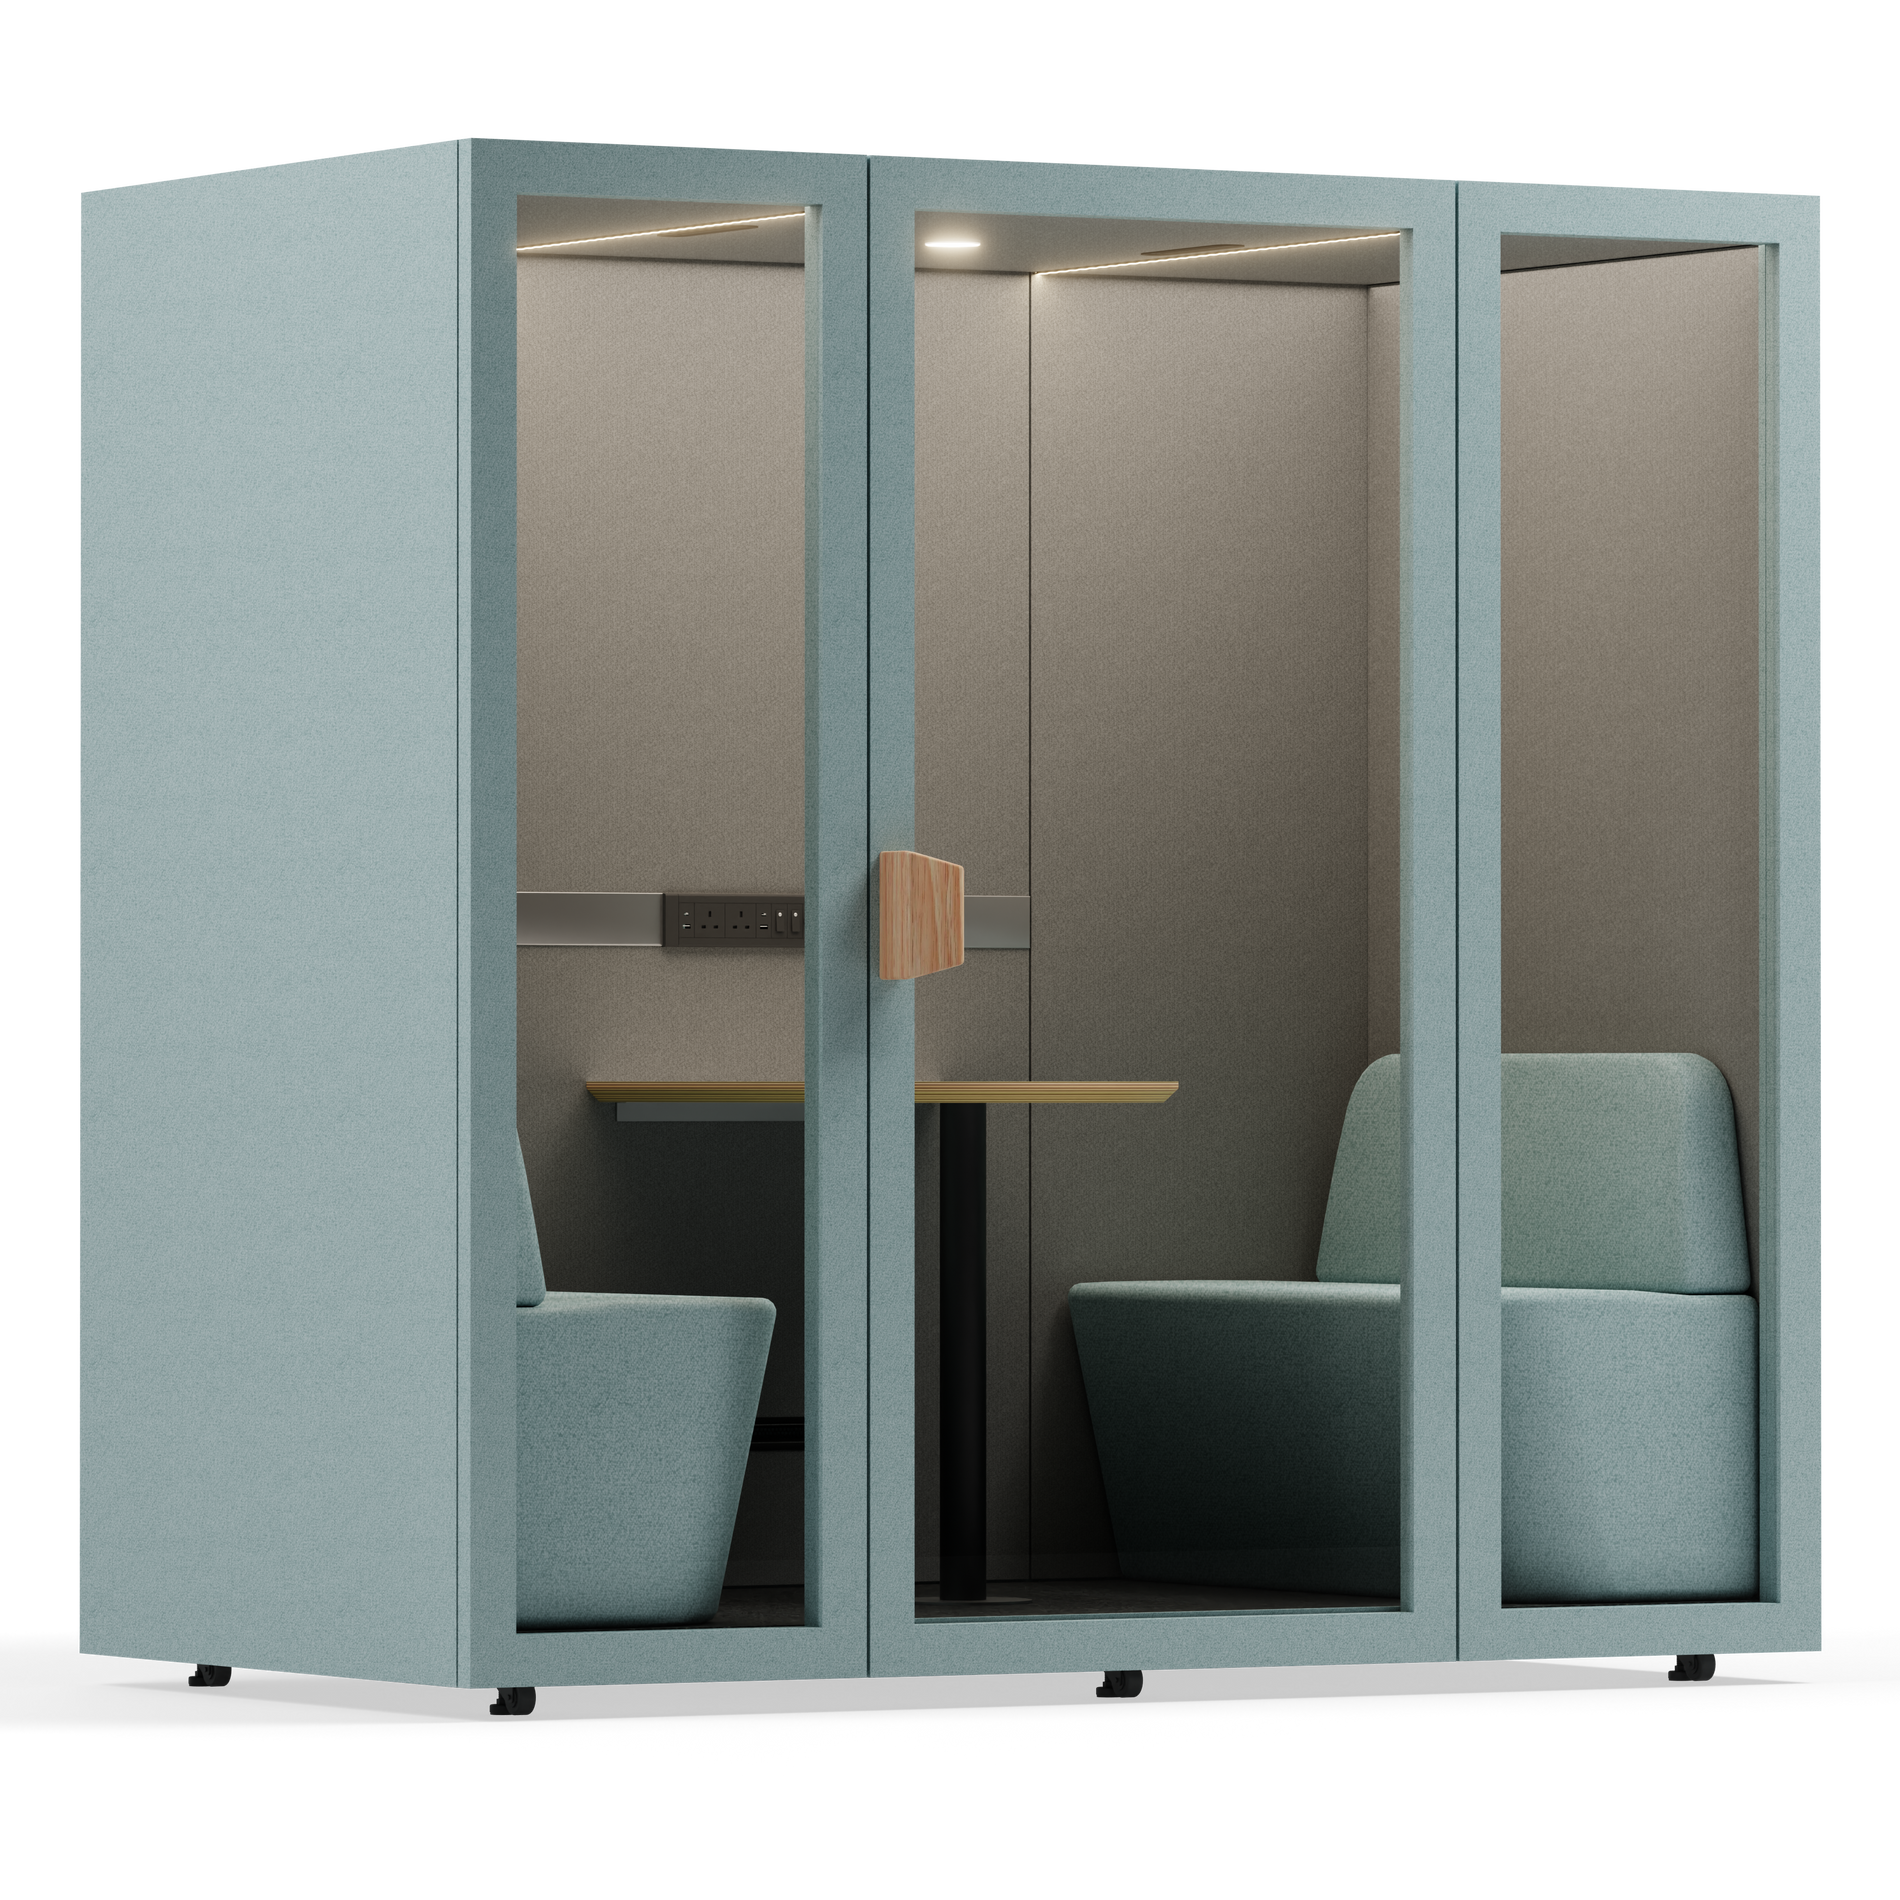 2 - 4 Person Meeting BoothFolio Dusty Teal / Furniture As Per Images